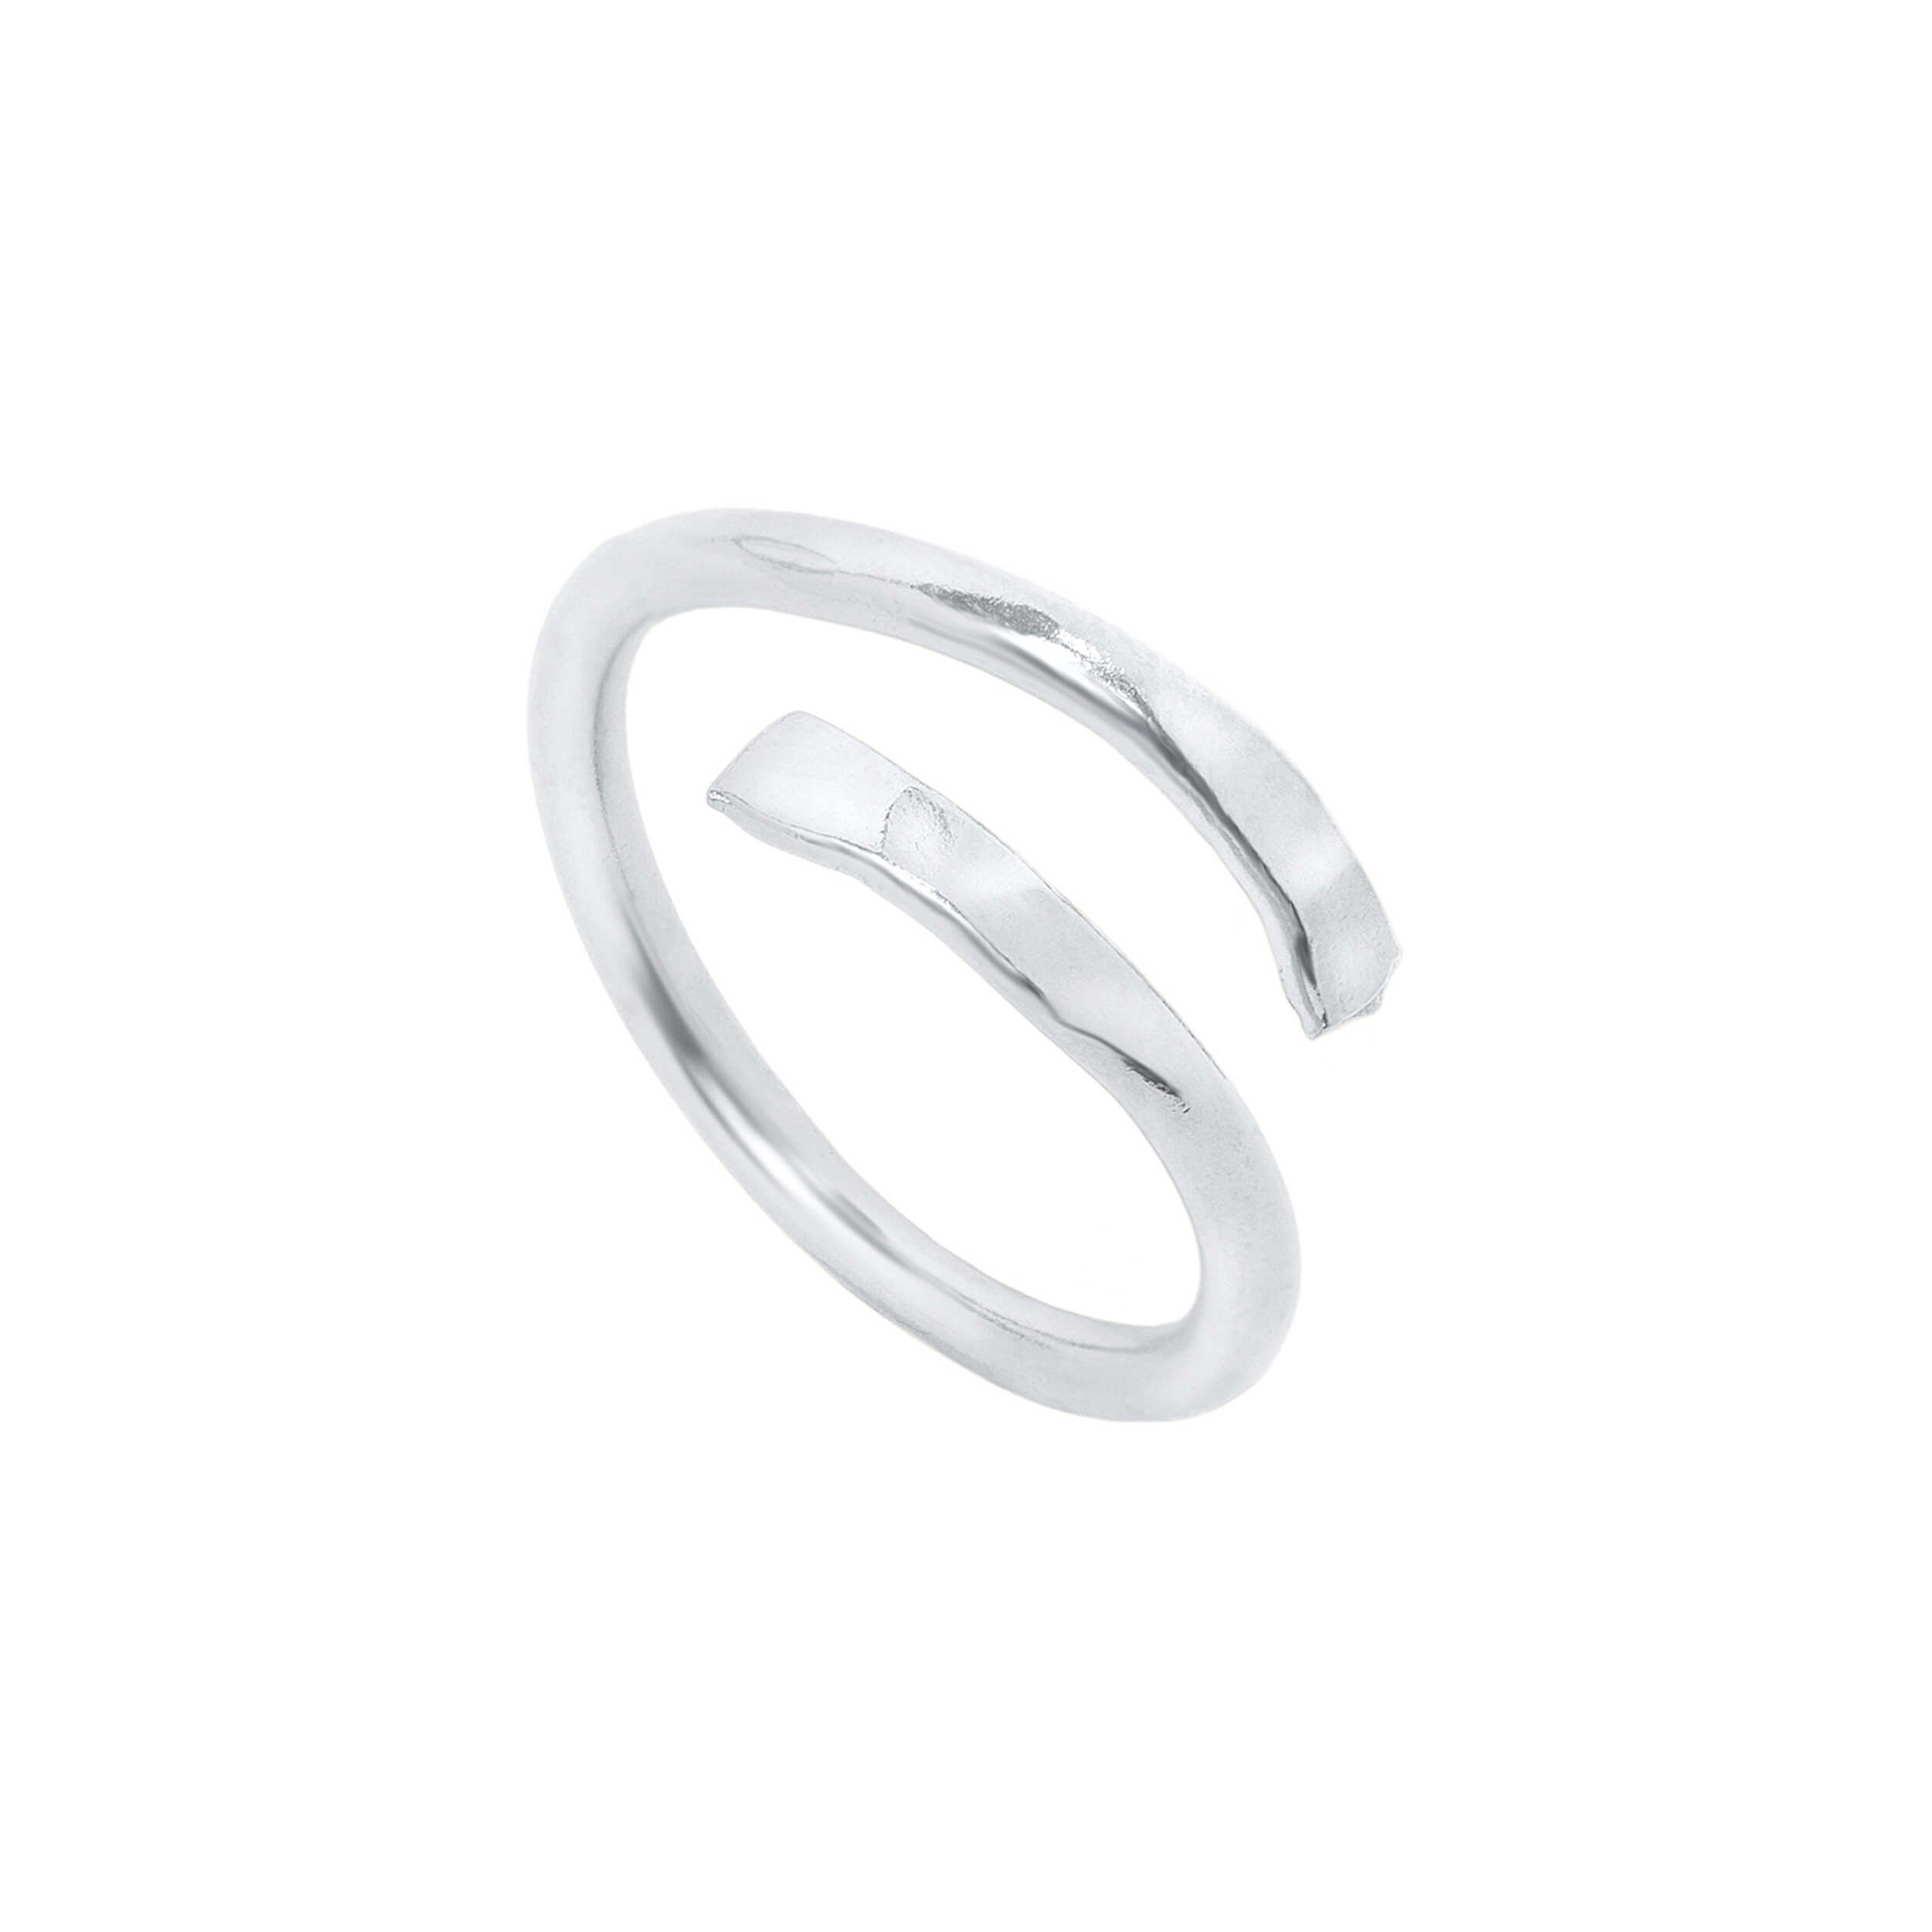 silver twist ring, silver wrap ring, eleanor jewellery design emilia ring, adjustable silver ring